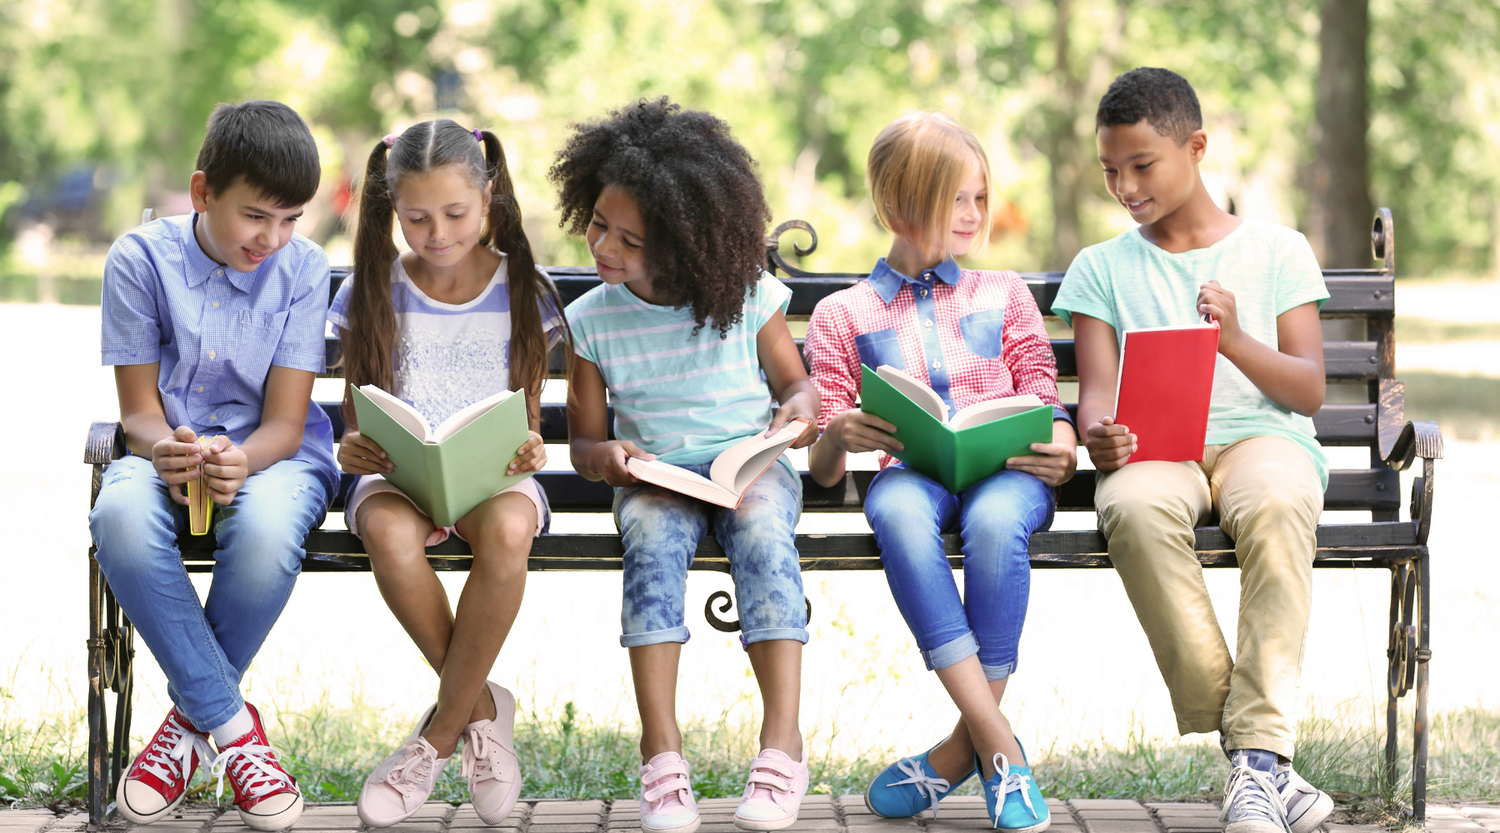 Five children of different races and genders sitting on a park bench reading books.